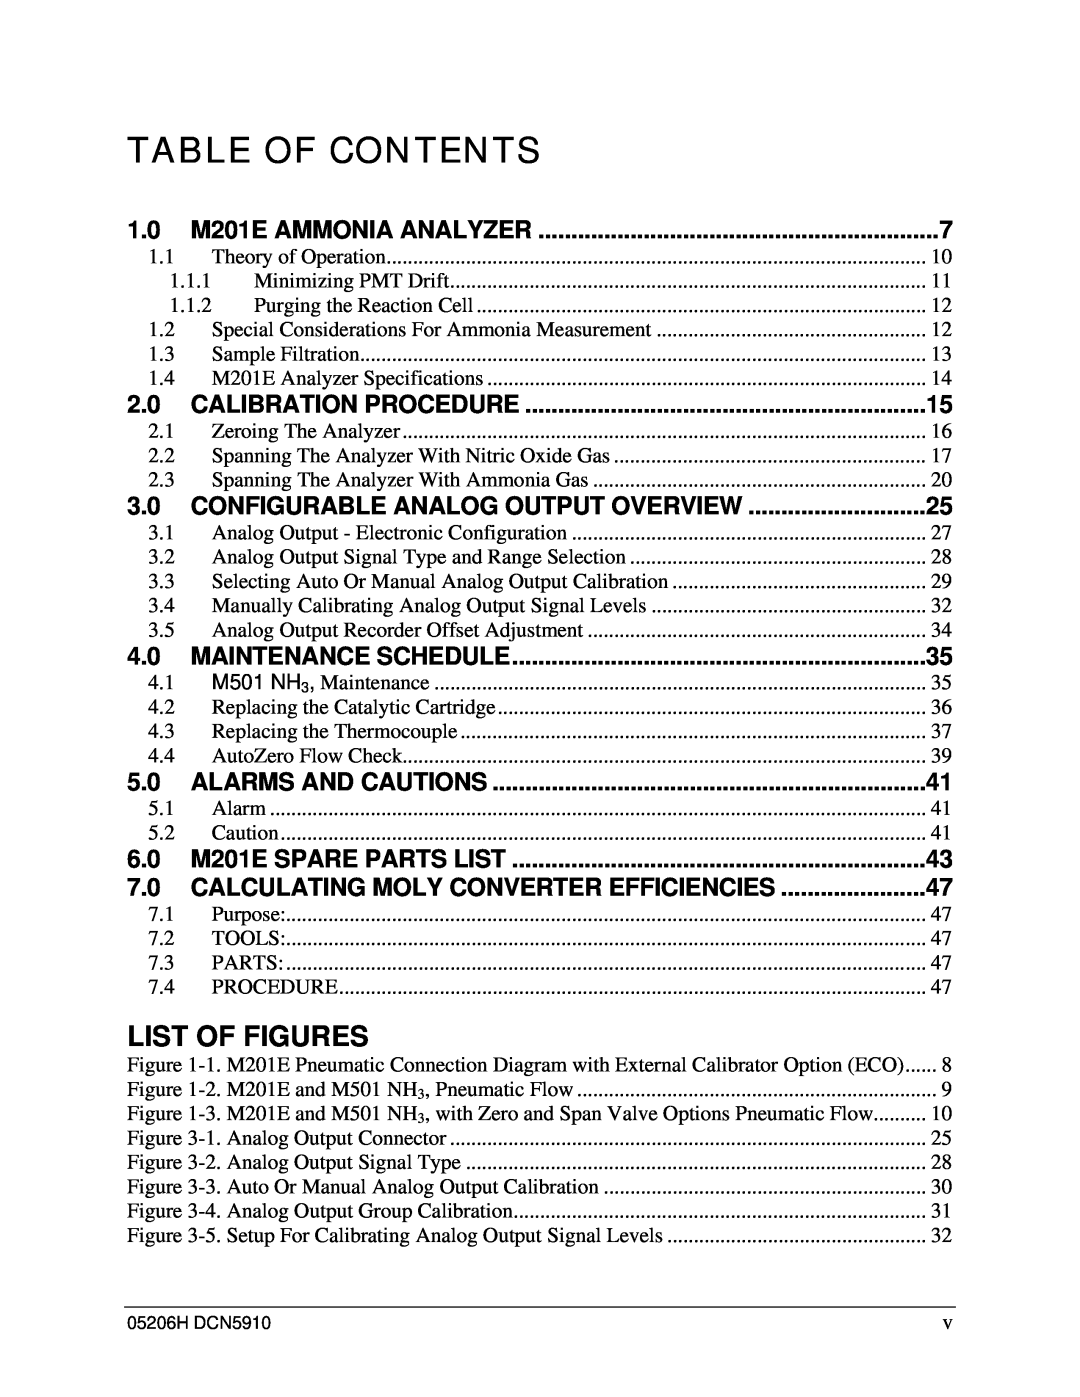 Teledyne manual Table Of Contents, List Of Figures, Configurable Analog Output Overview, 6.0 M201E SPARE PARTS LIST 